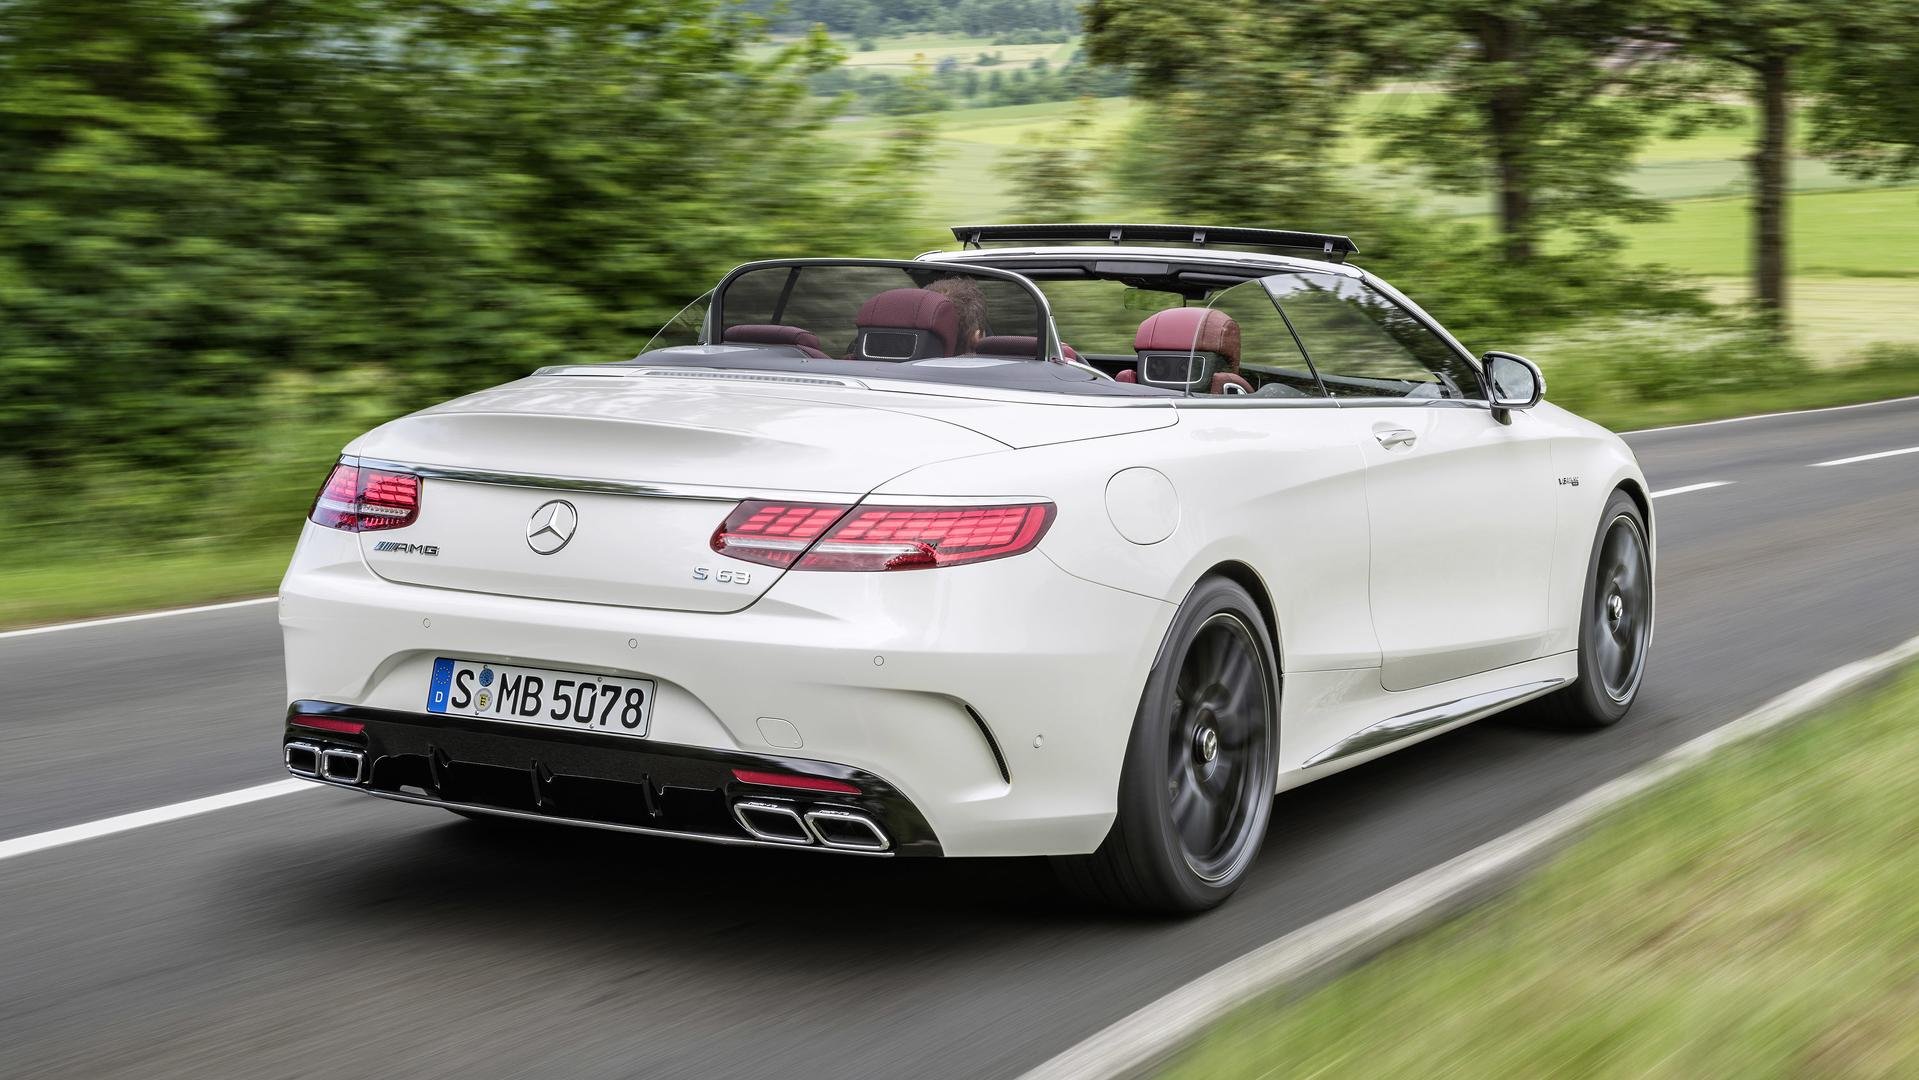 Mercedes-AMG S 63 4MATIC+ Cabriolet